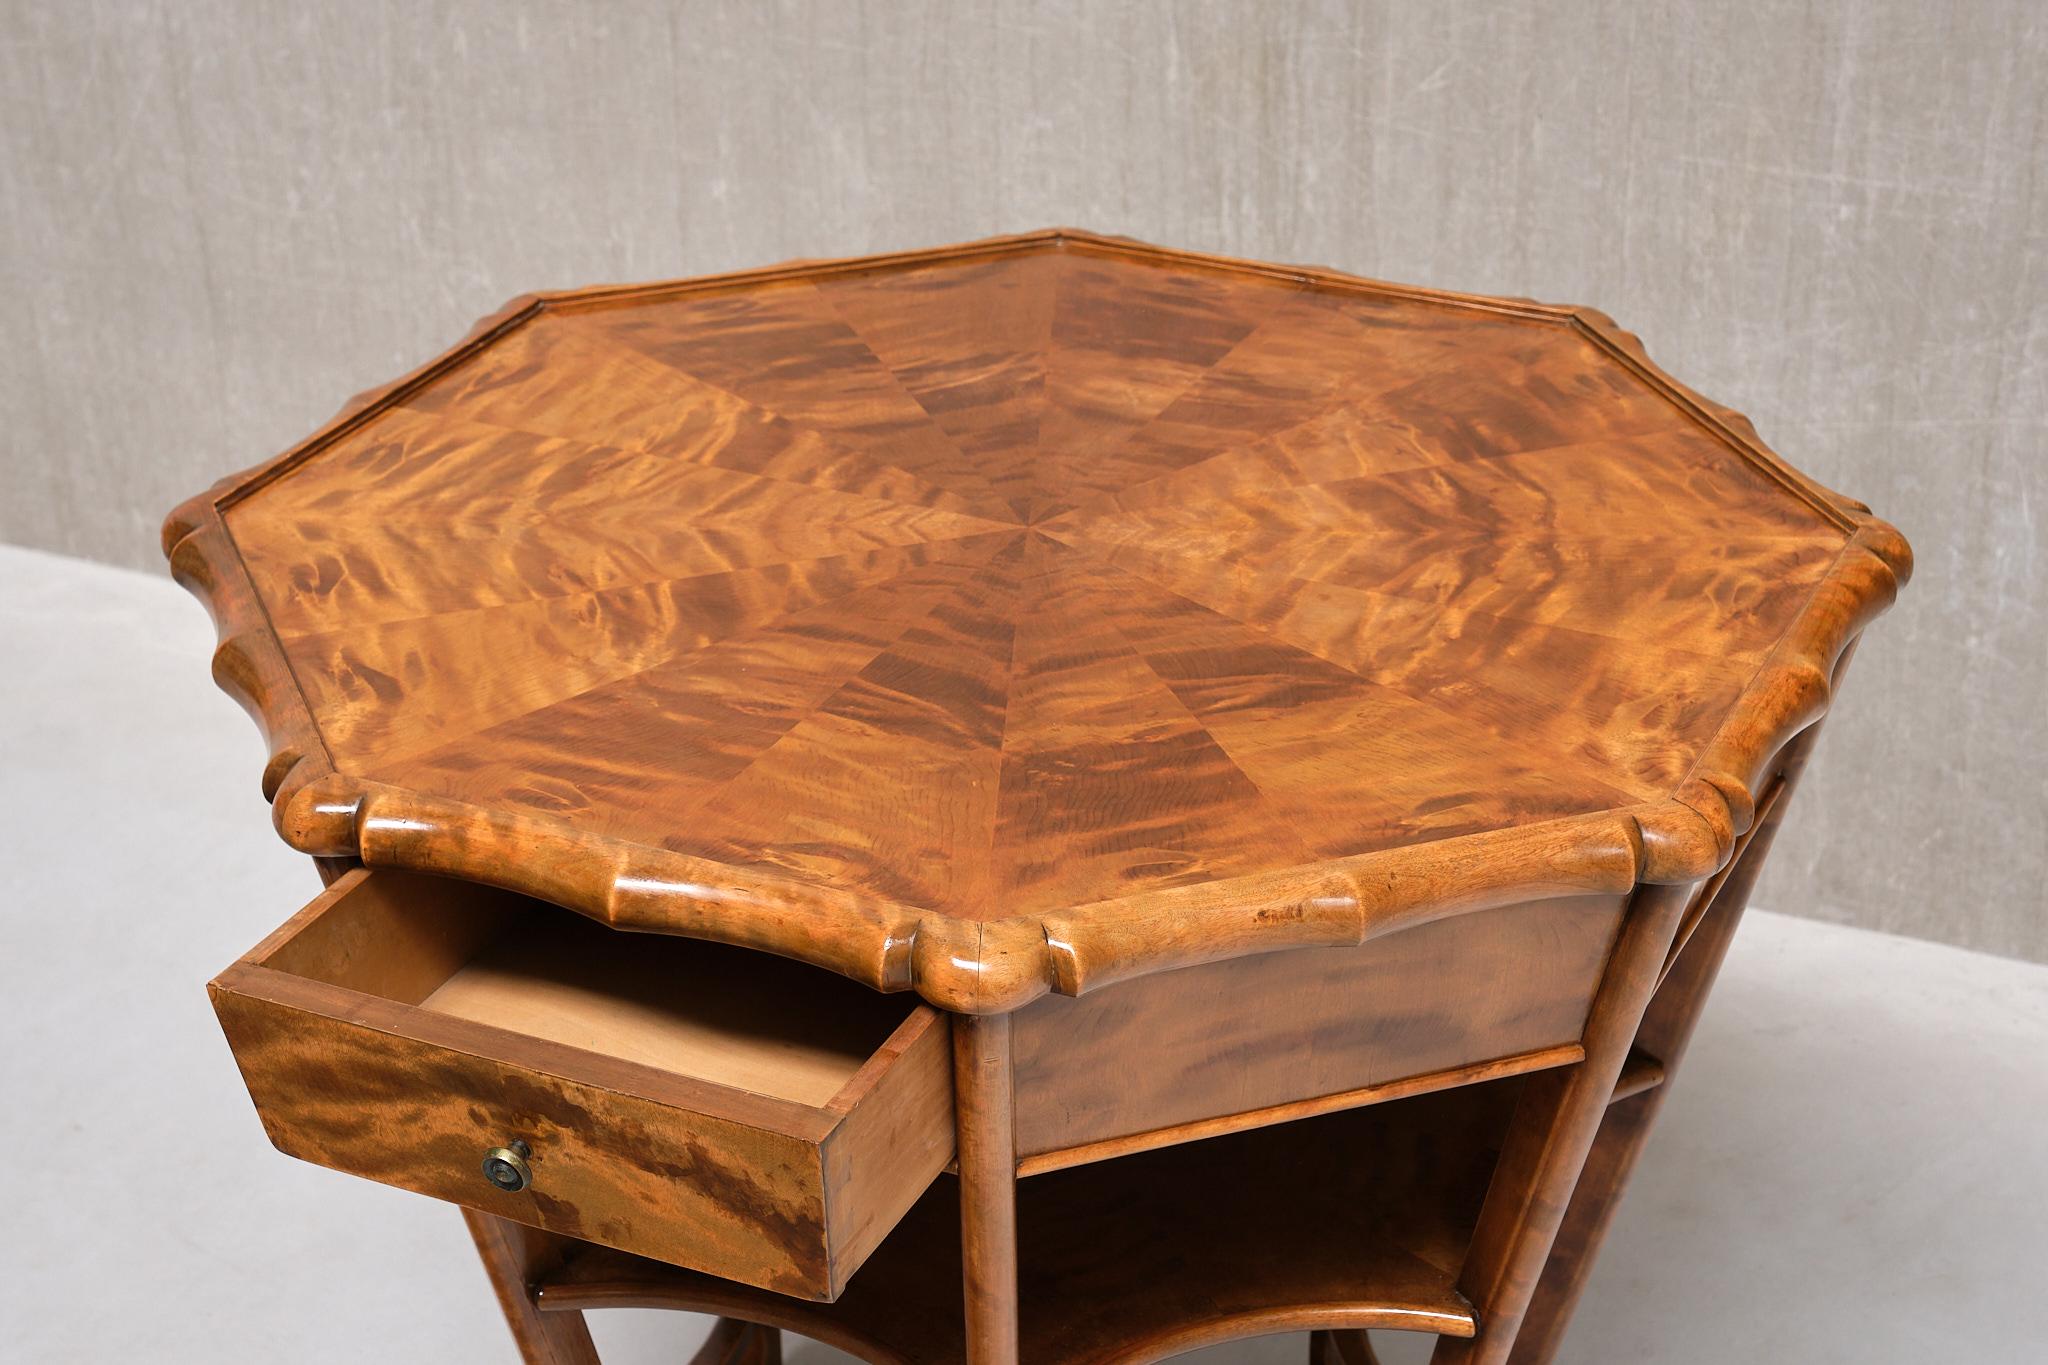 Exceptional Expressionist Octagonal Center Table in Flamed Birch, Germany, 1920s For Sale 8